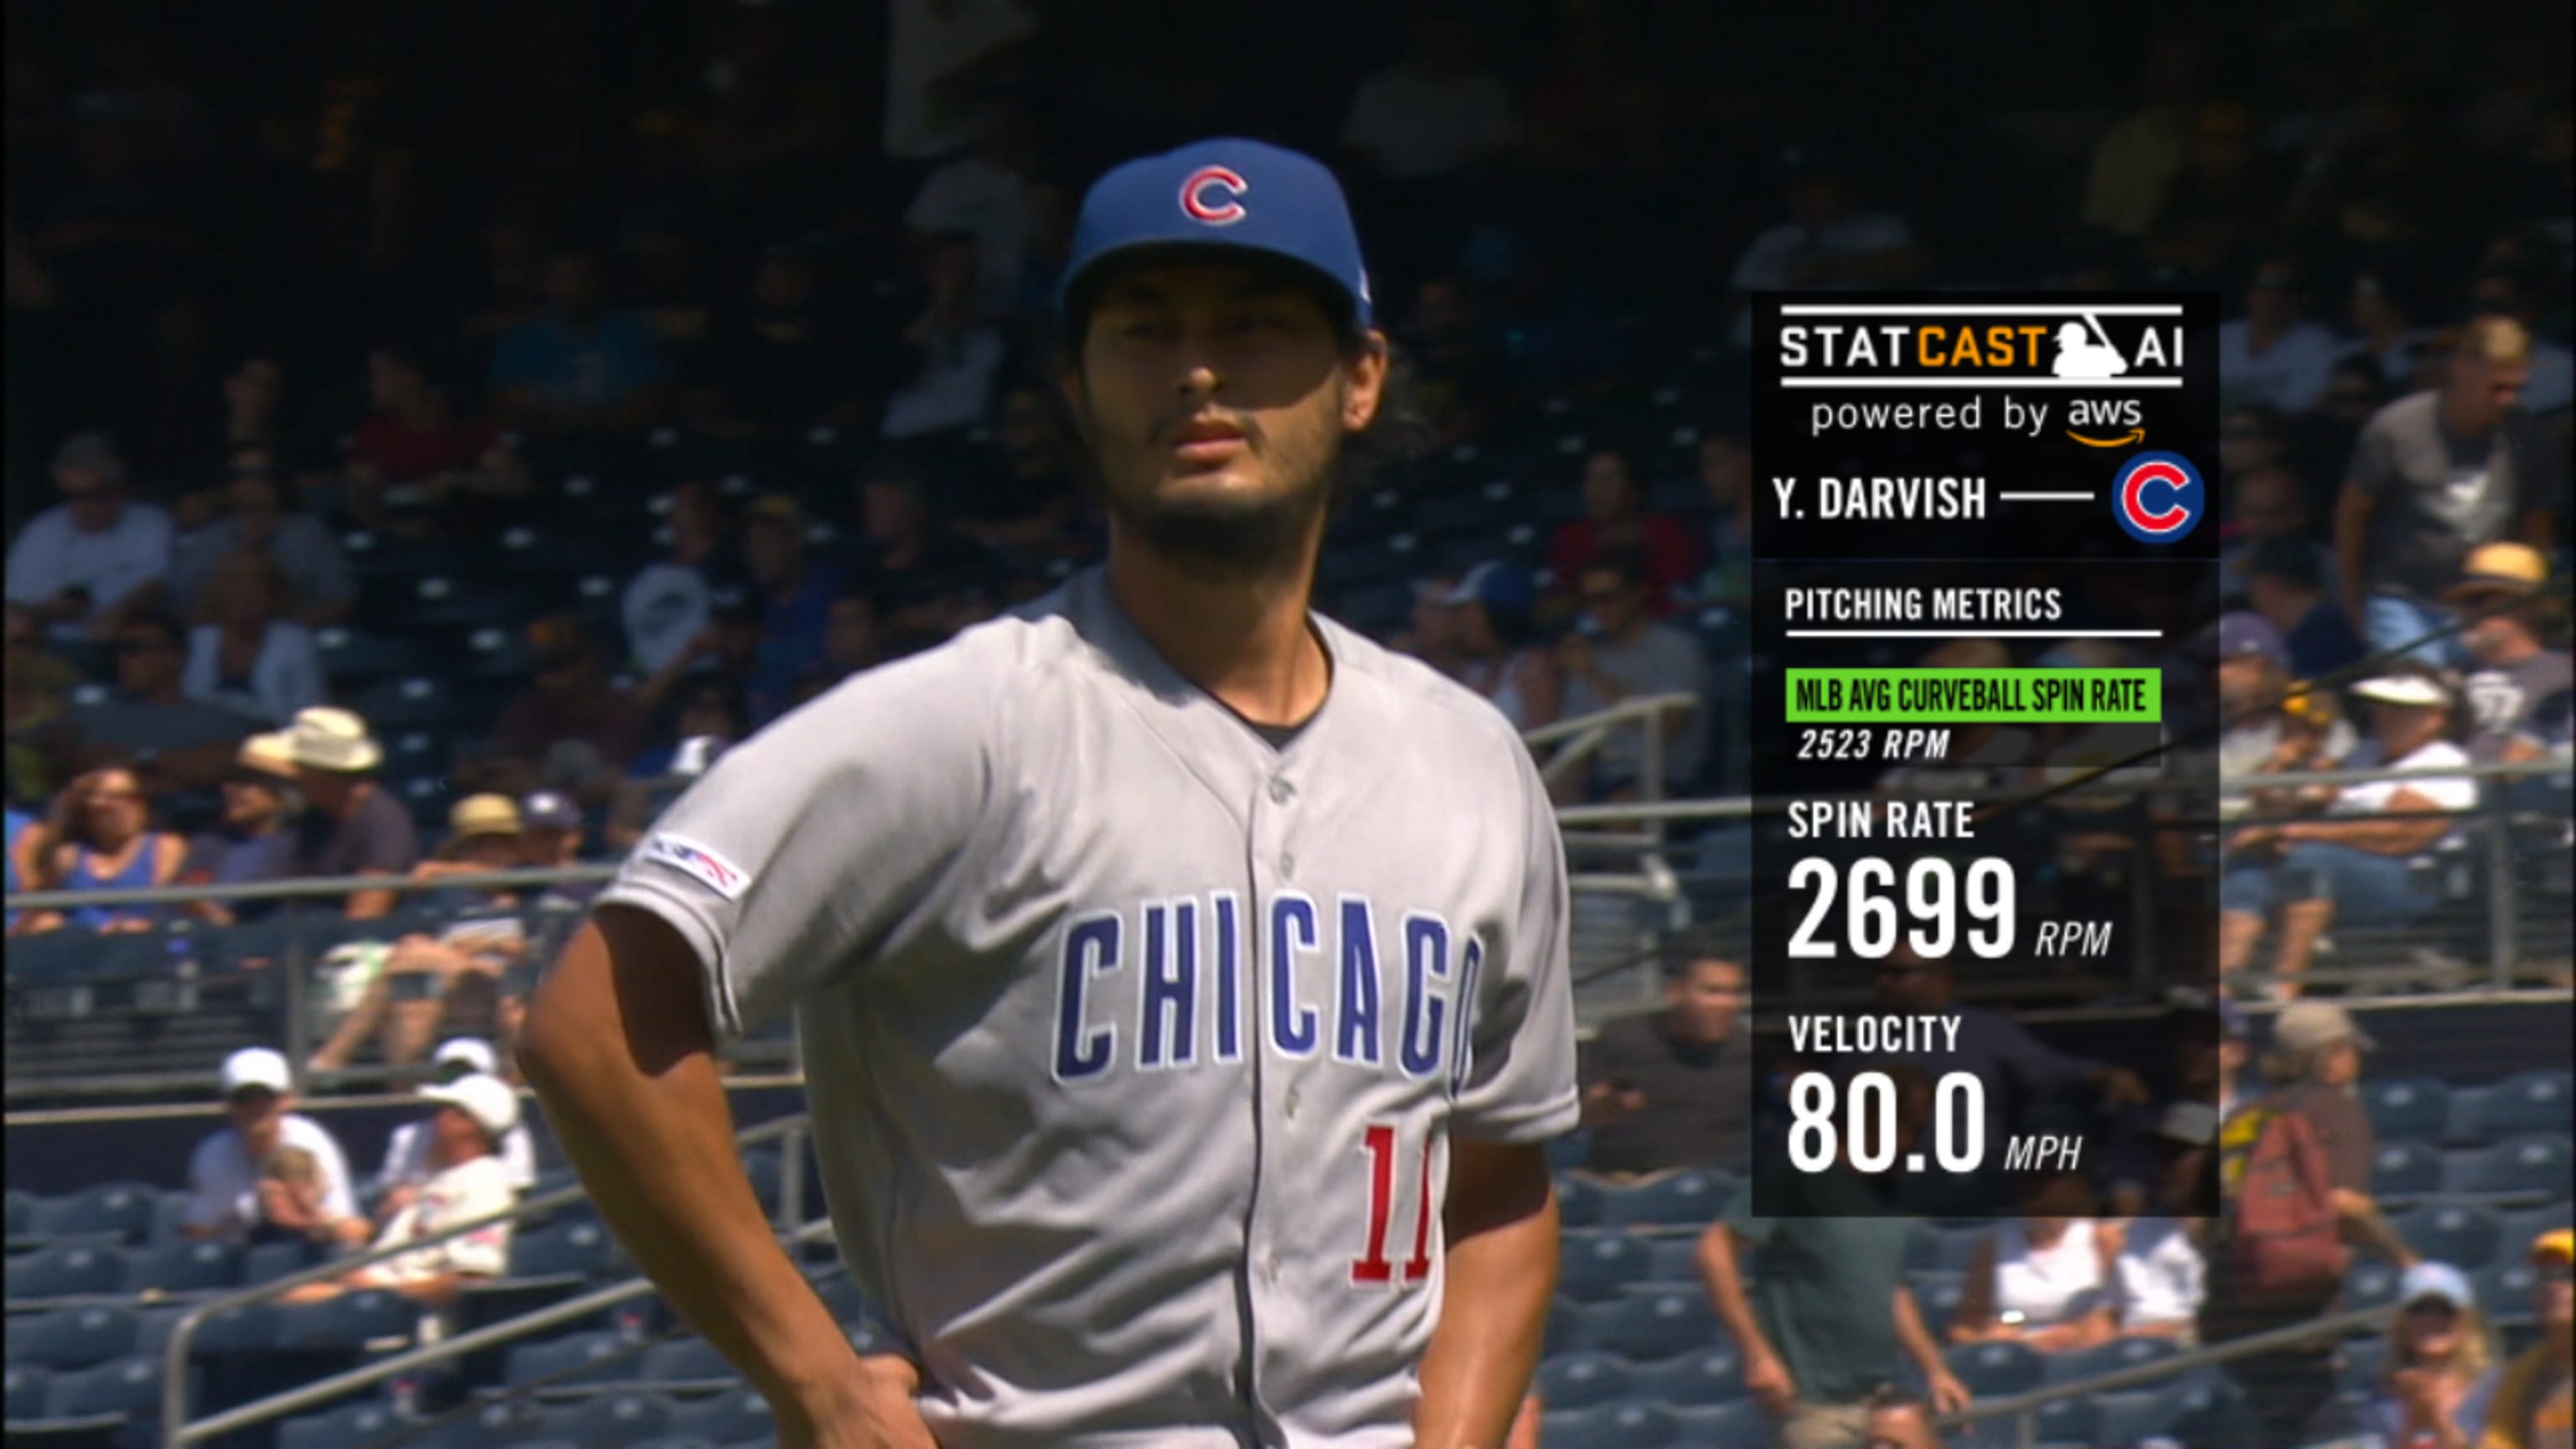 Darvish Returns to Wrigley, Lifts Padres Over Cubs 4-1 - Bloomberg